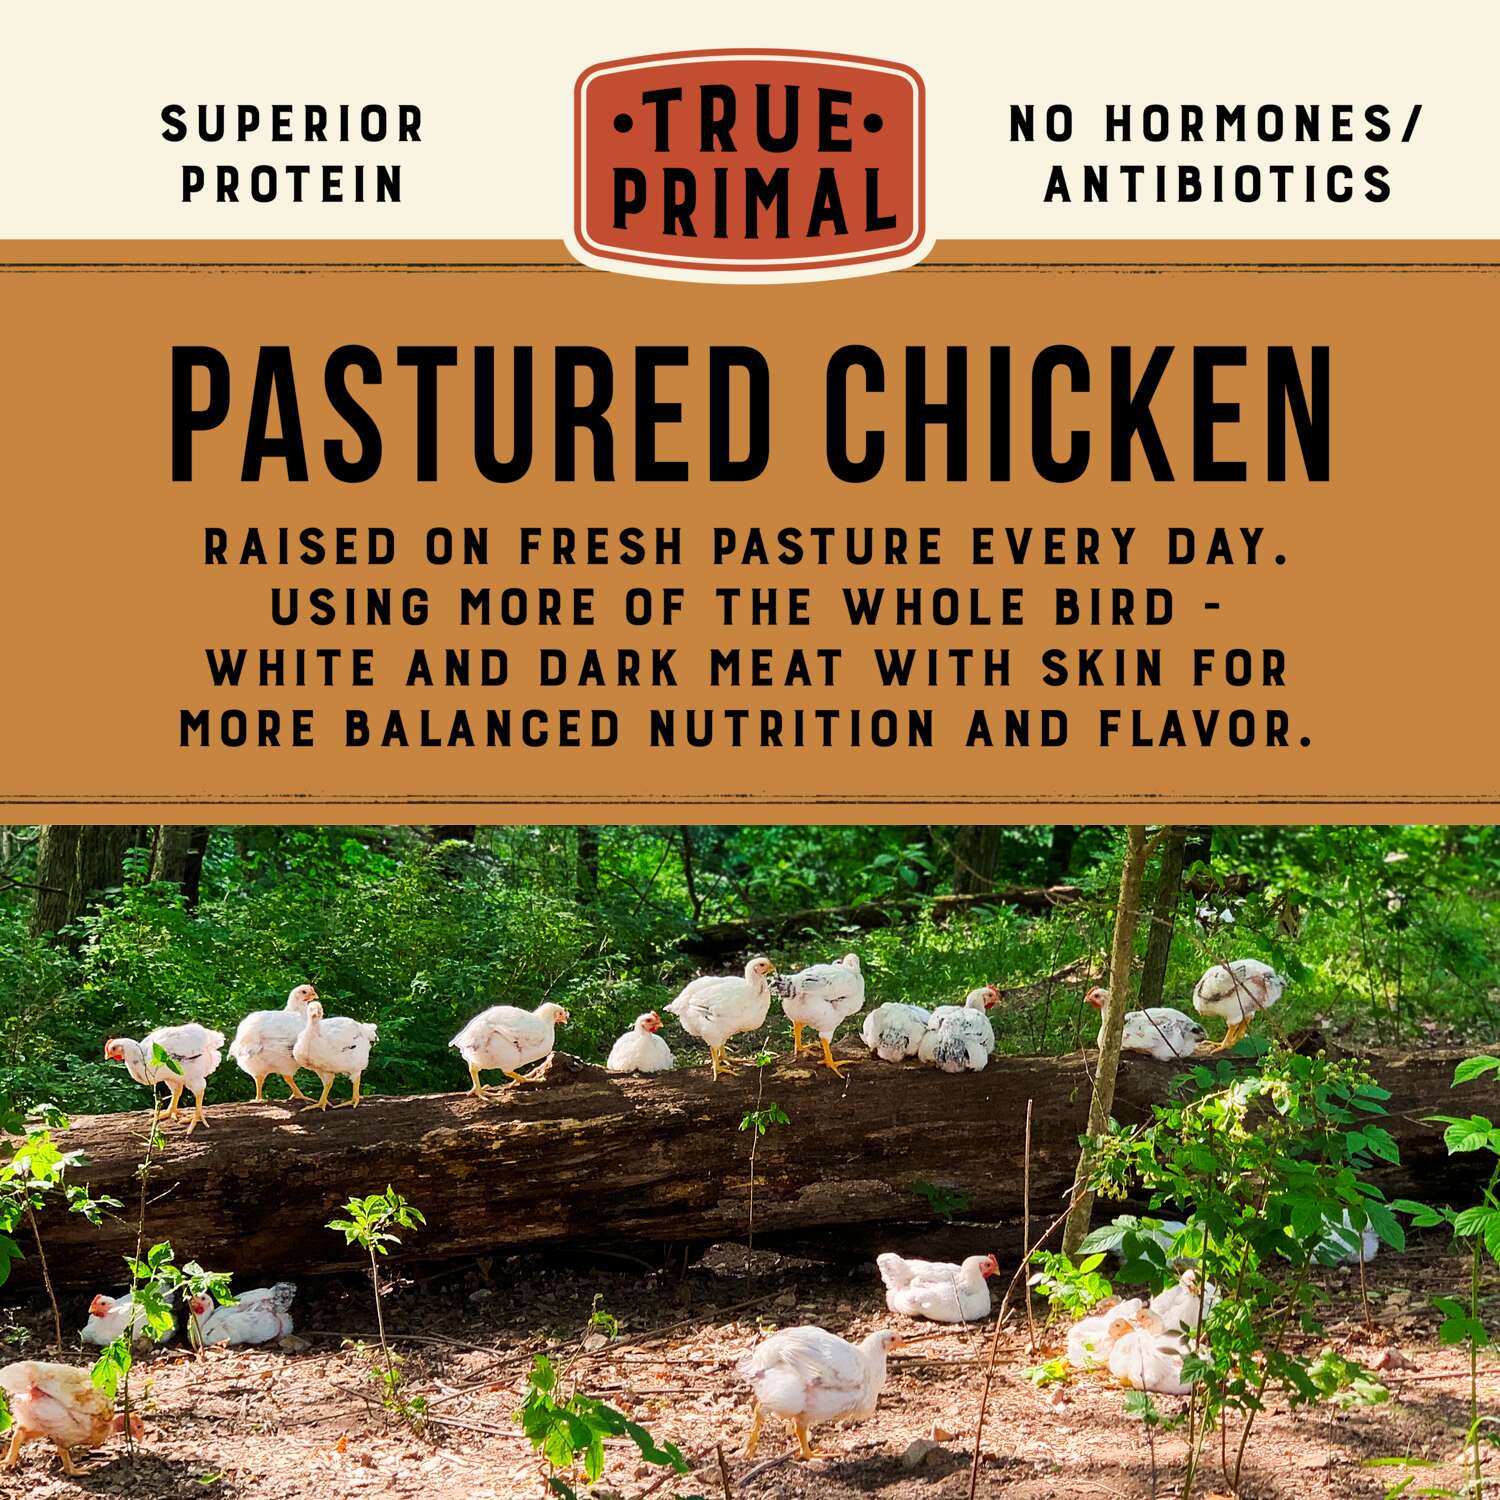 chickens grazing among trees and shrubs, with title text: pastured chicken